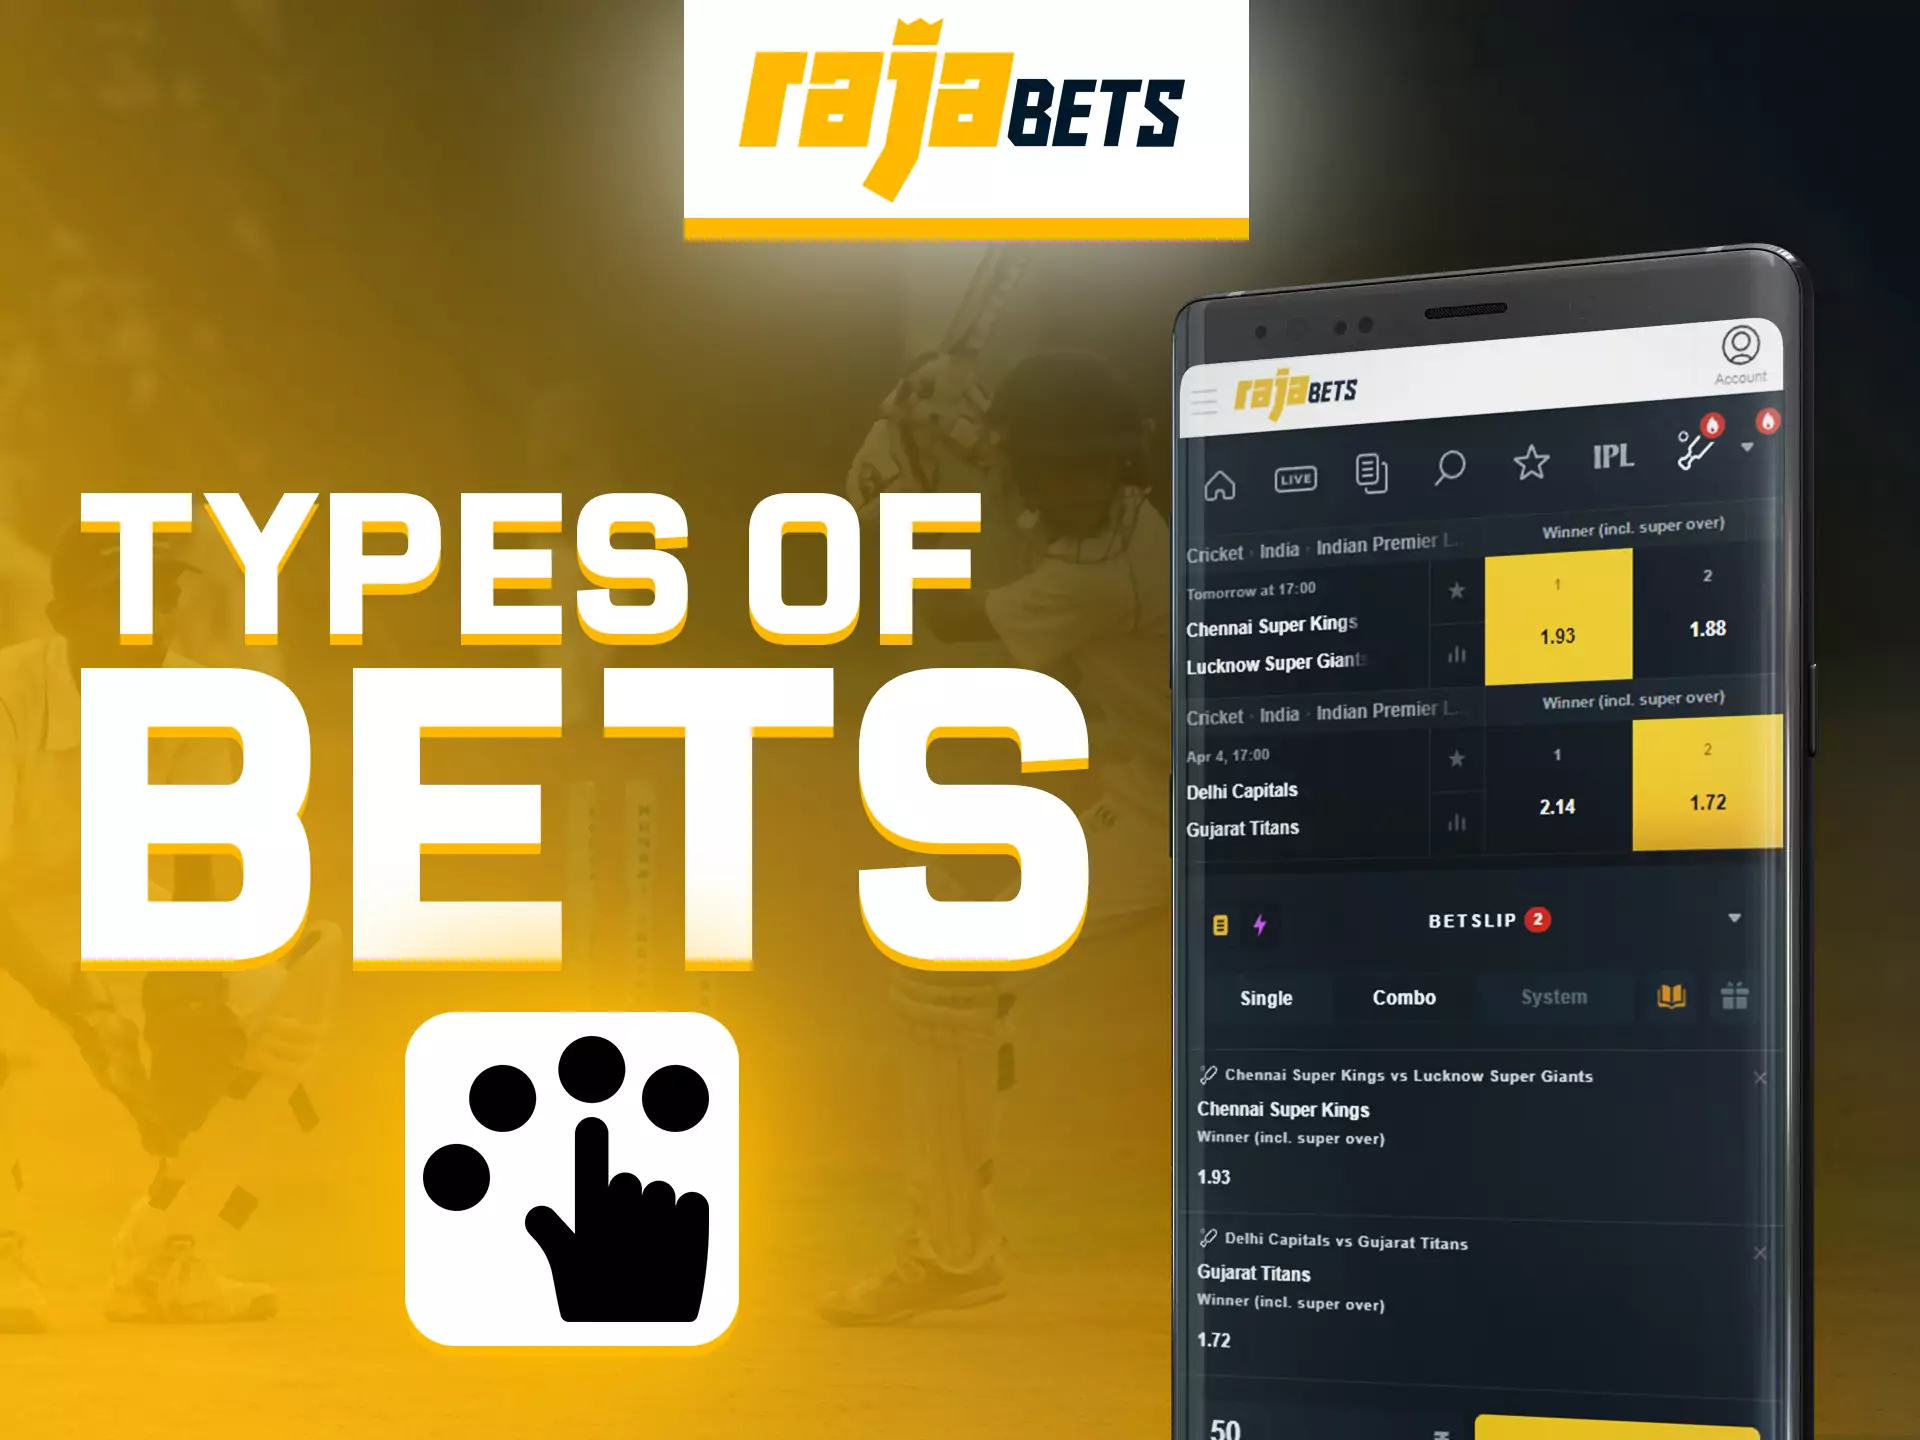 In Rajabets app, there are different types of bets available to you.